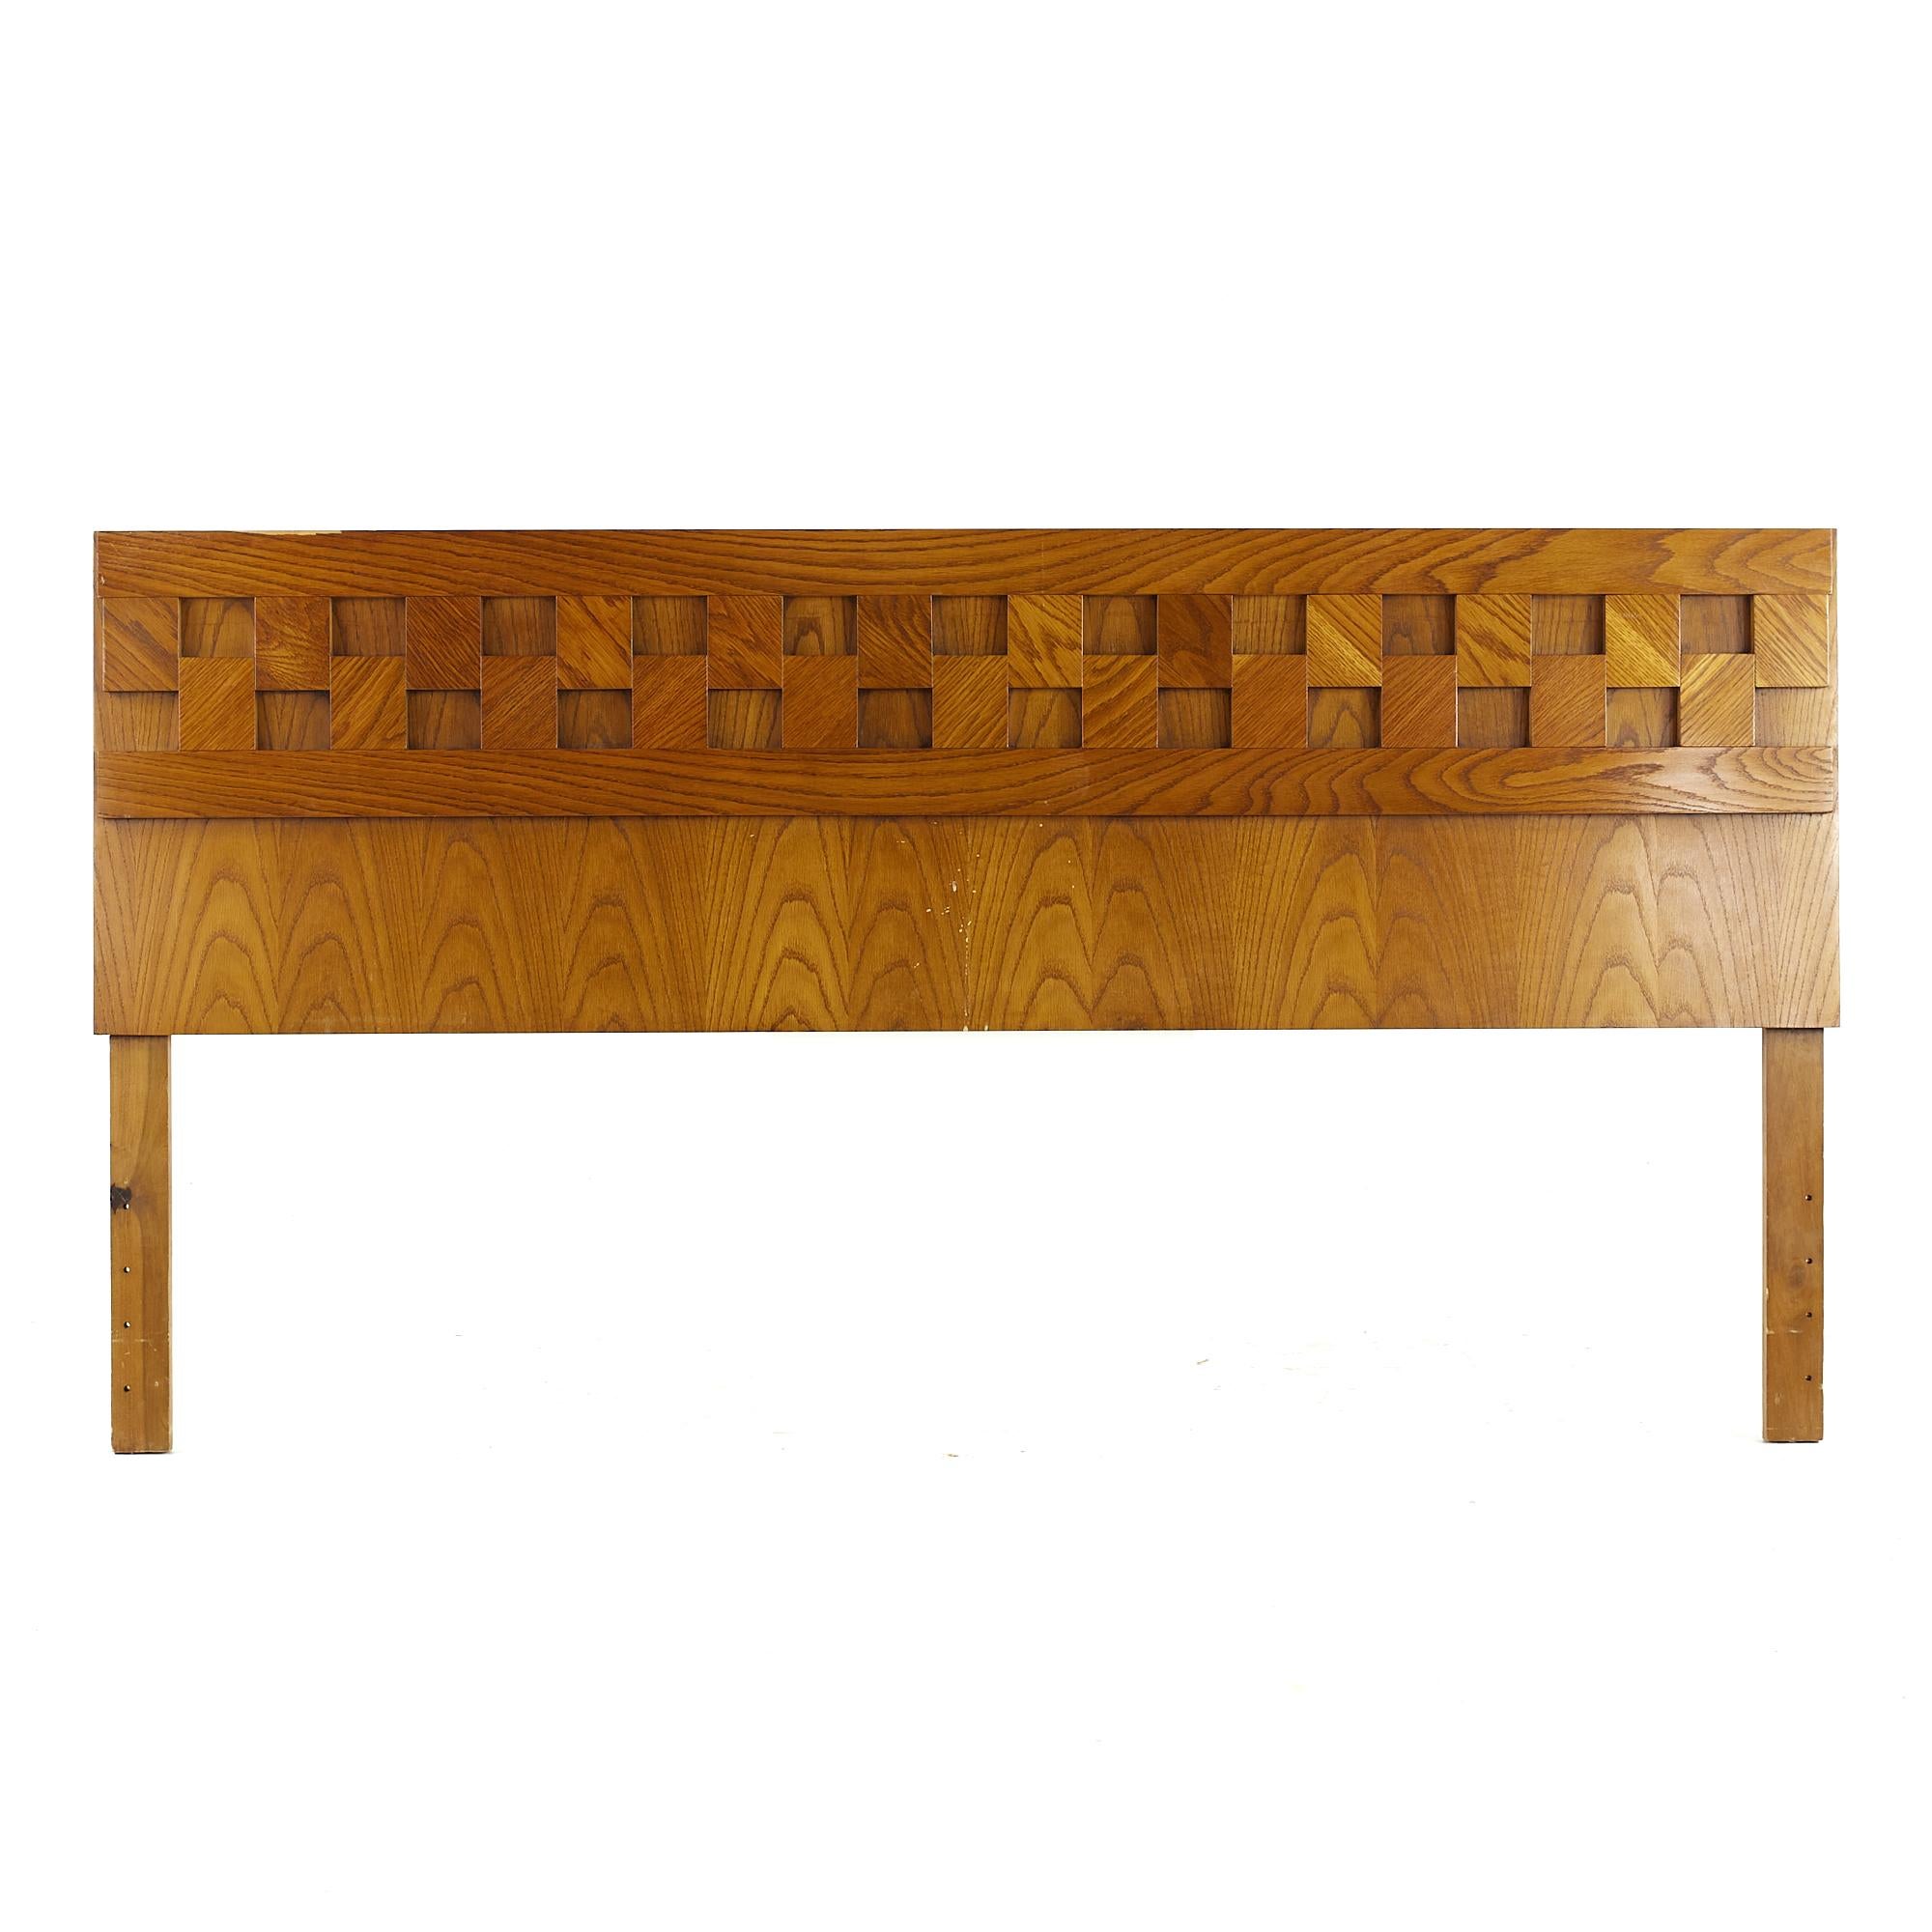 Lane Staccato Brutalist midcentury Oak King Headboard

This headboard measures: 80 wide x 1.75 deep x 42 inches high

All pieces of furniture can be had in what we call restored vintage condition. That means the piece is restored upon purchase